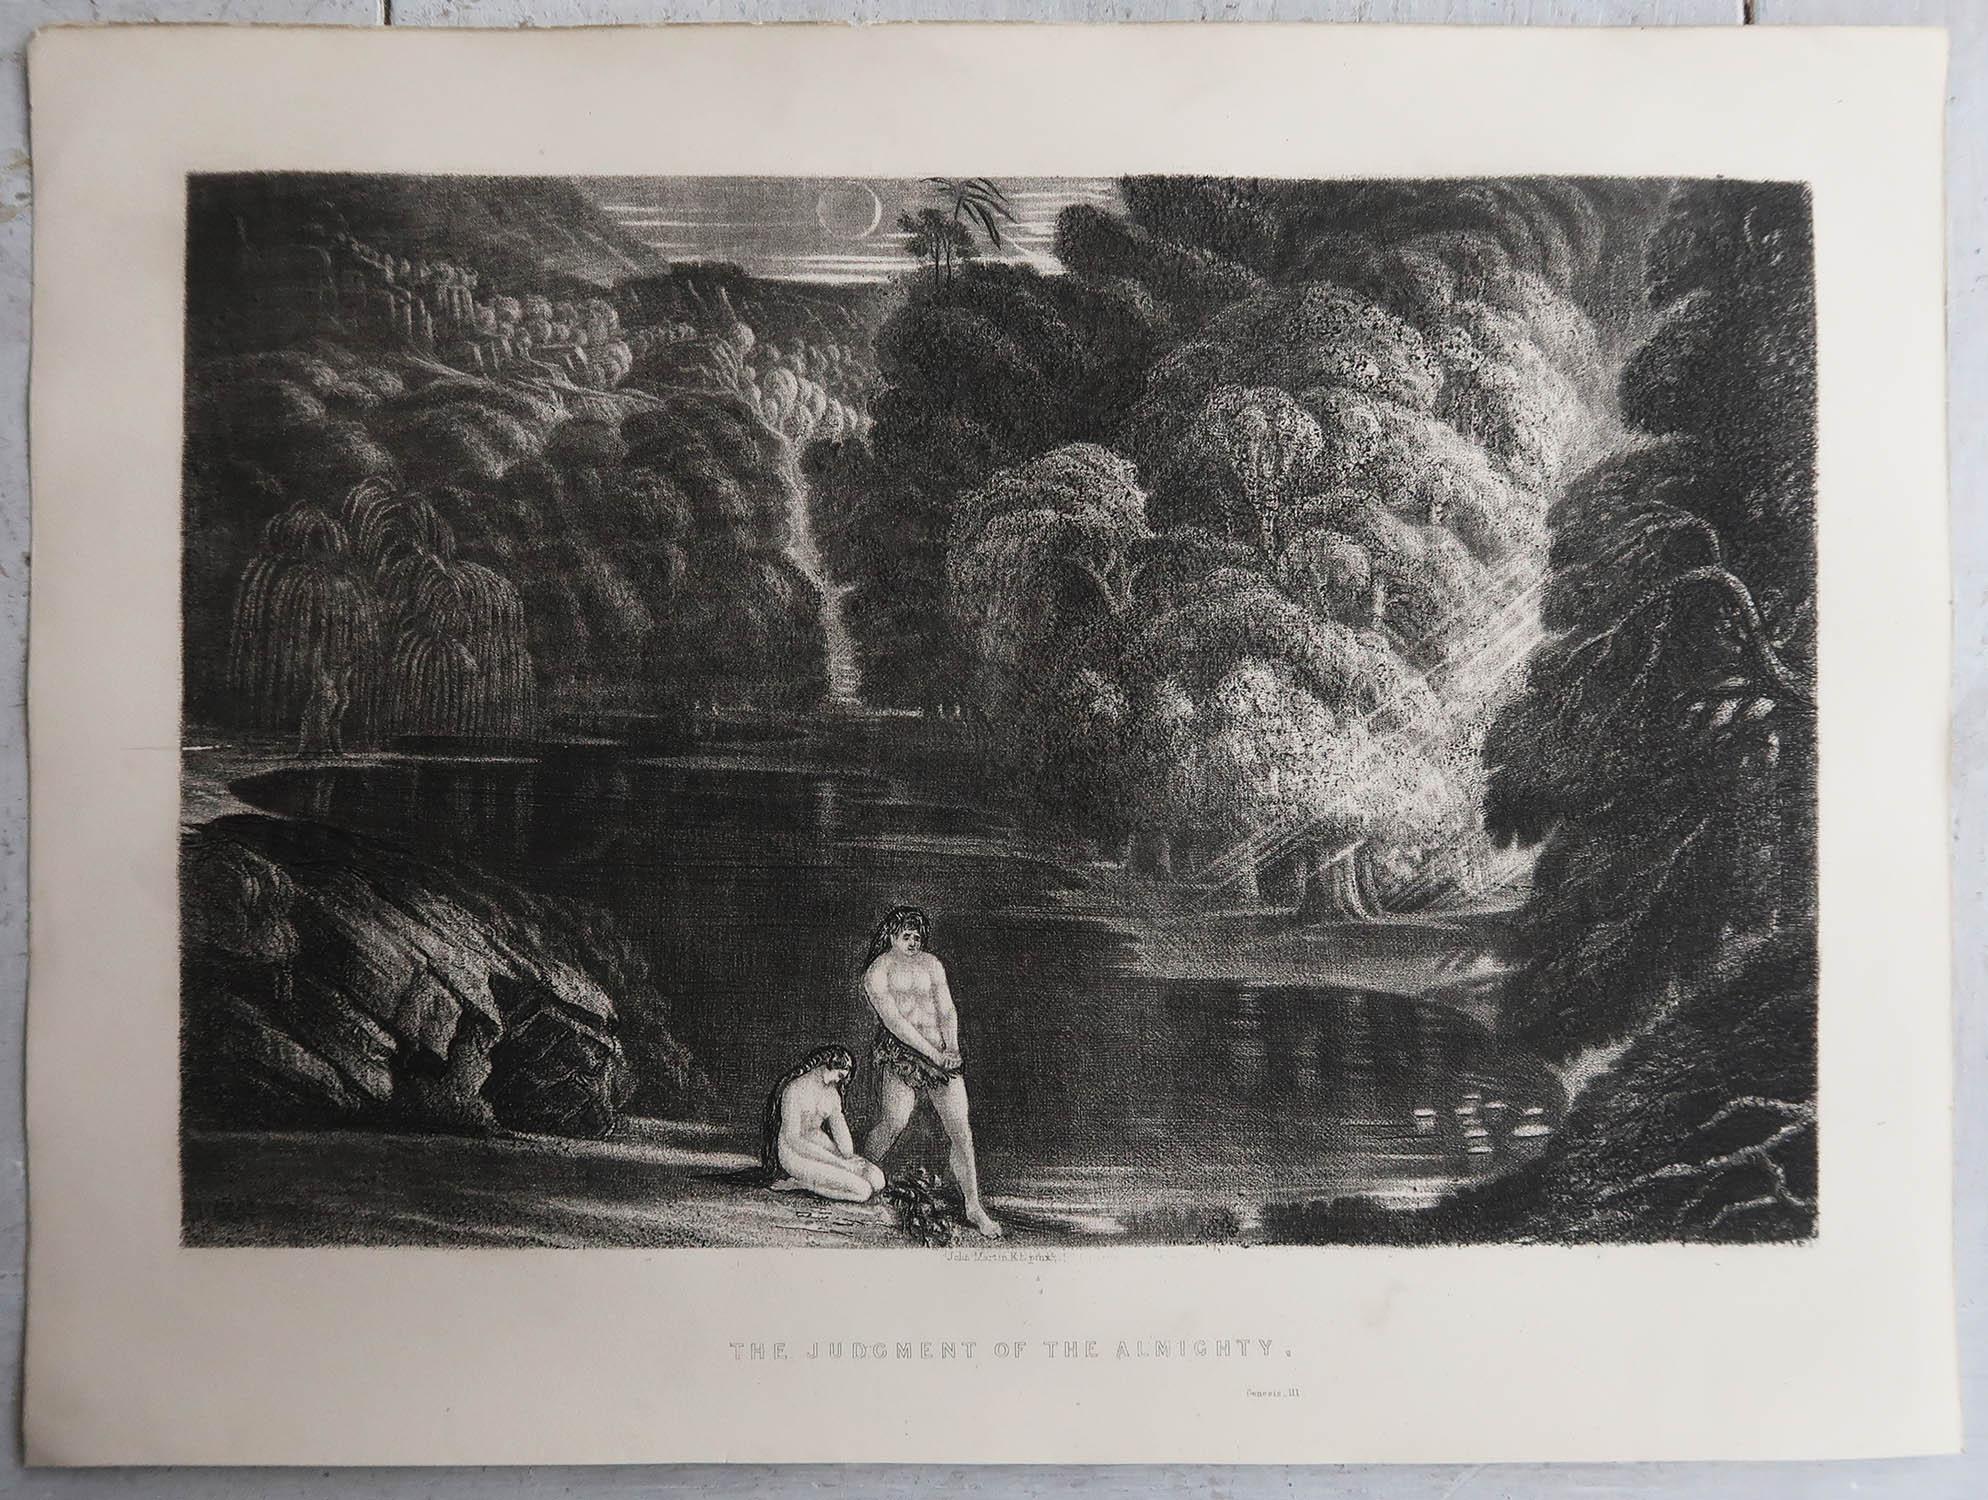 Romantic Mezzotint by John Martin, the Judgment of the Almighty, Sangster, circa 1850 For Sale